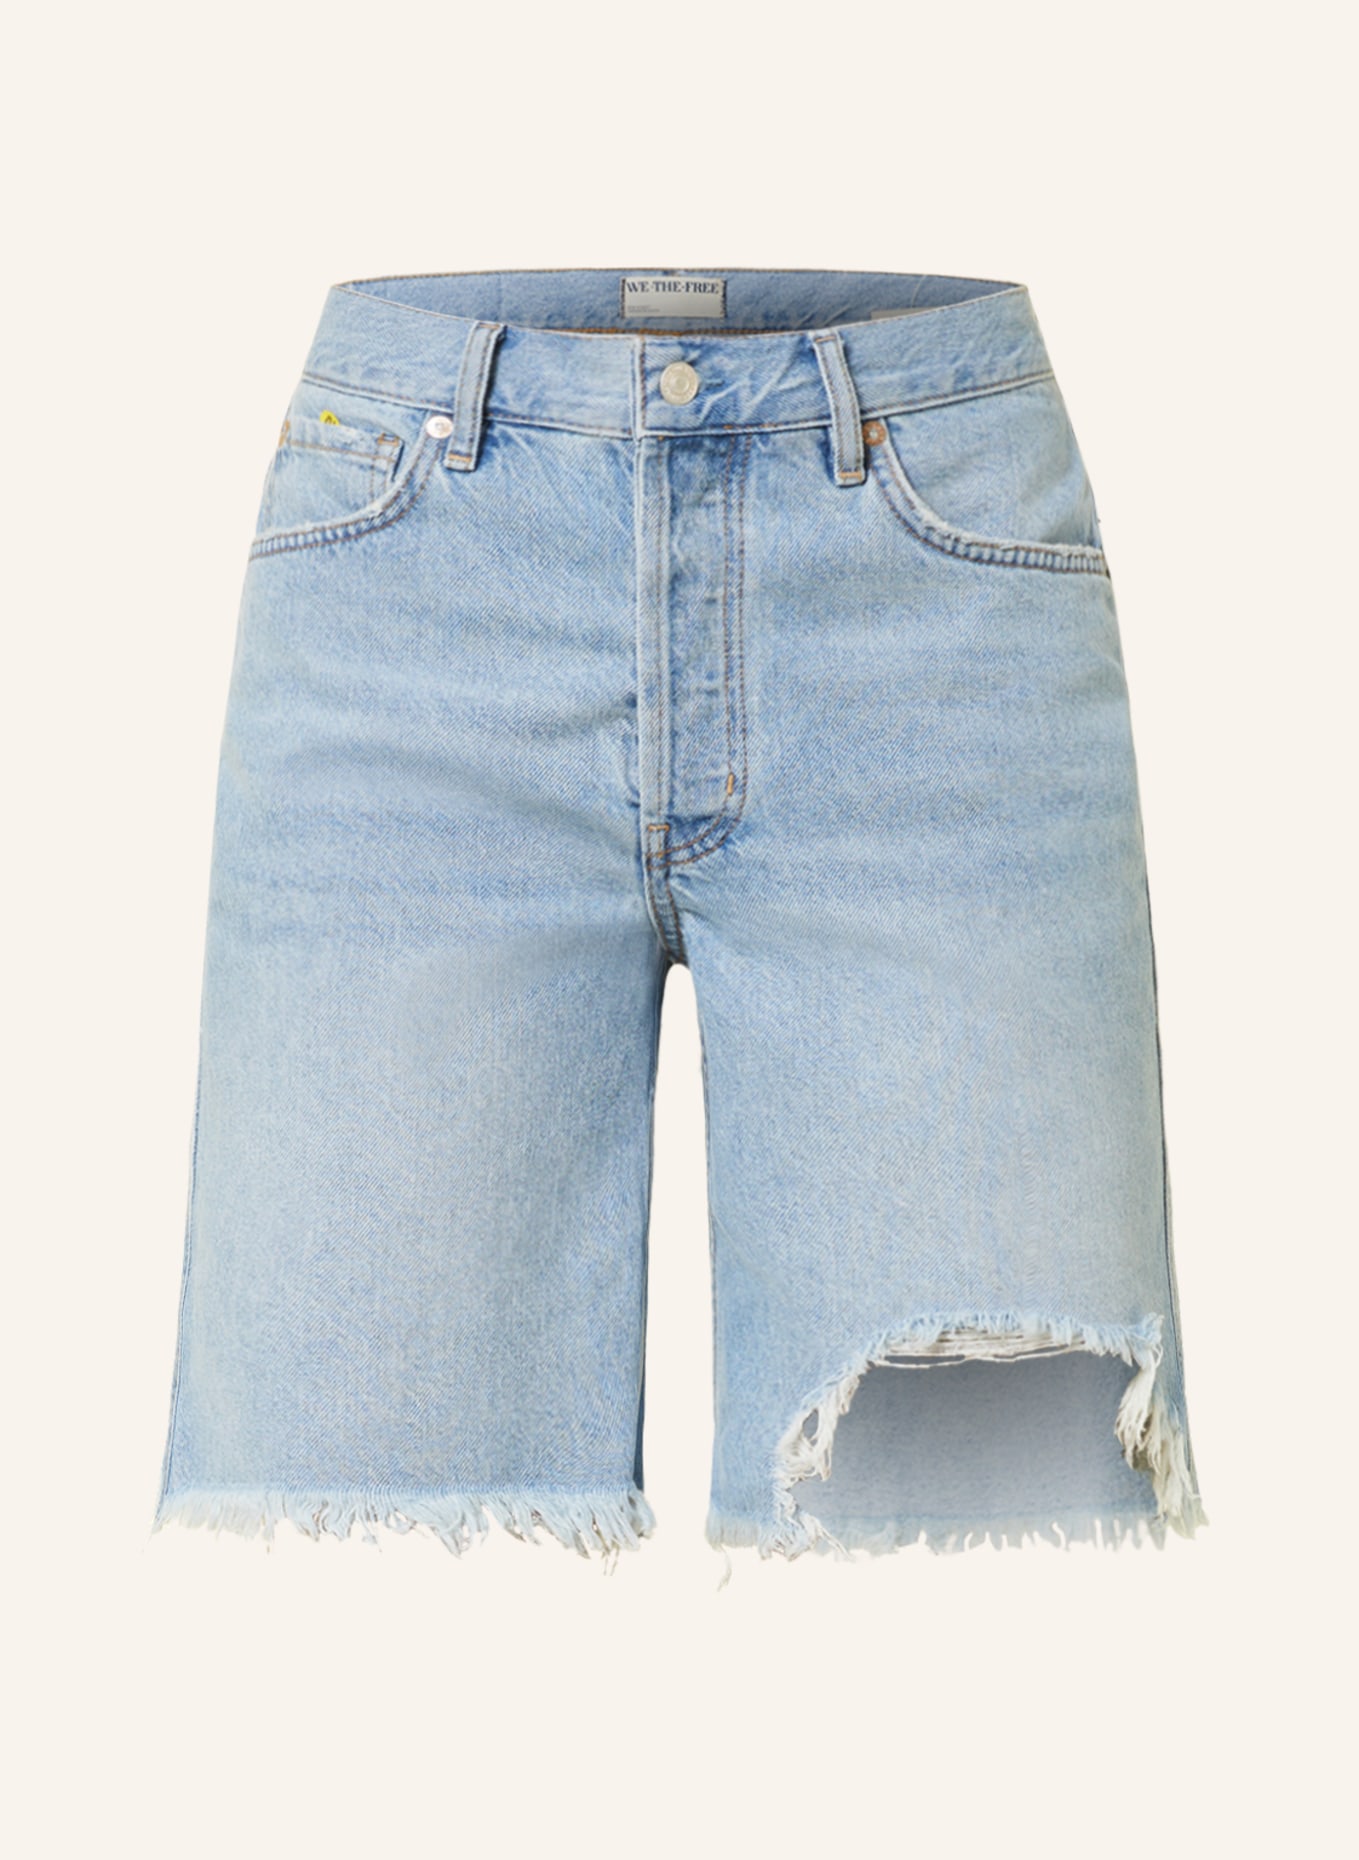 Free People Jeansshorts BIG SUR COAST, Farbe: 4410 Washed Away(Bild null)